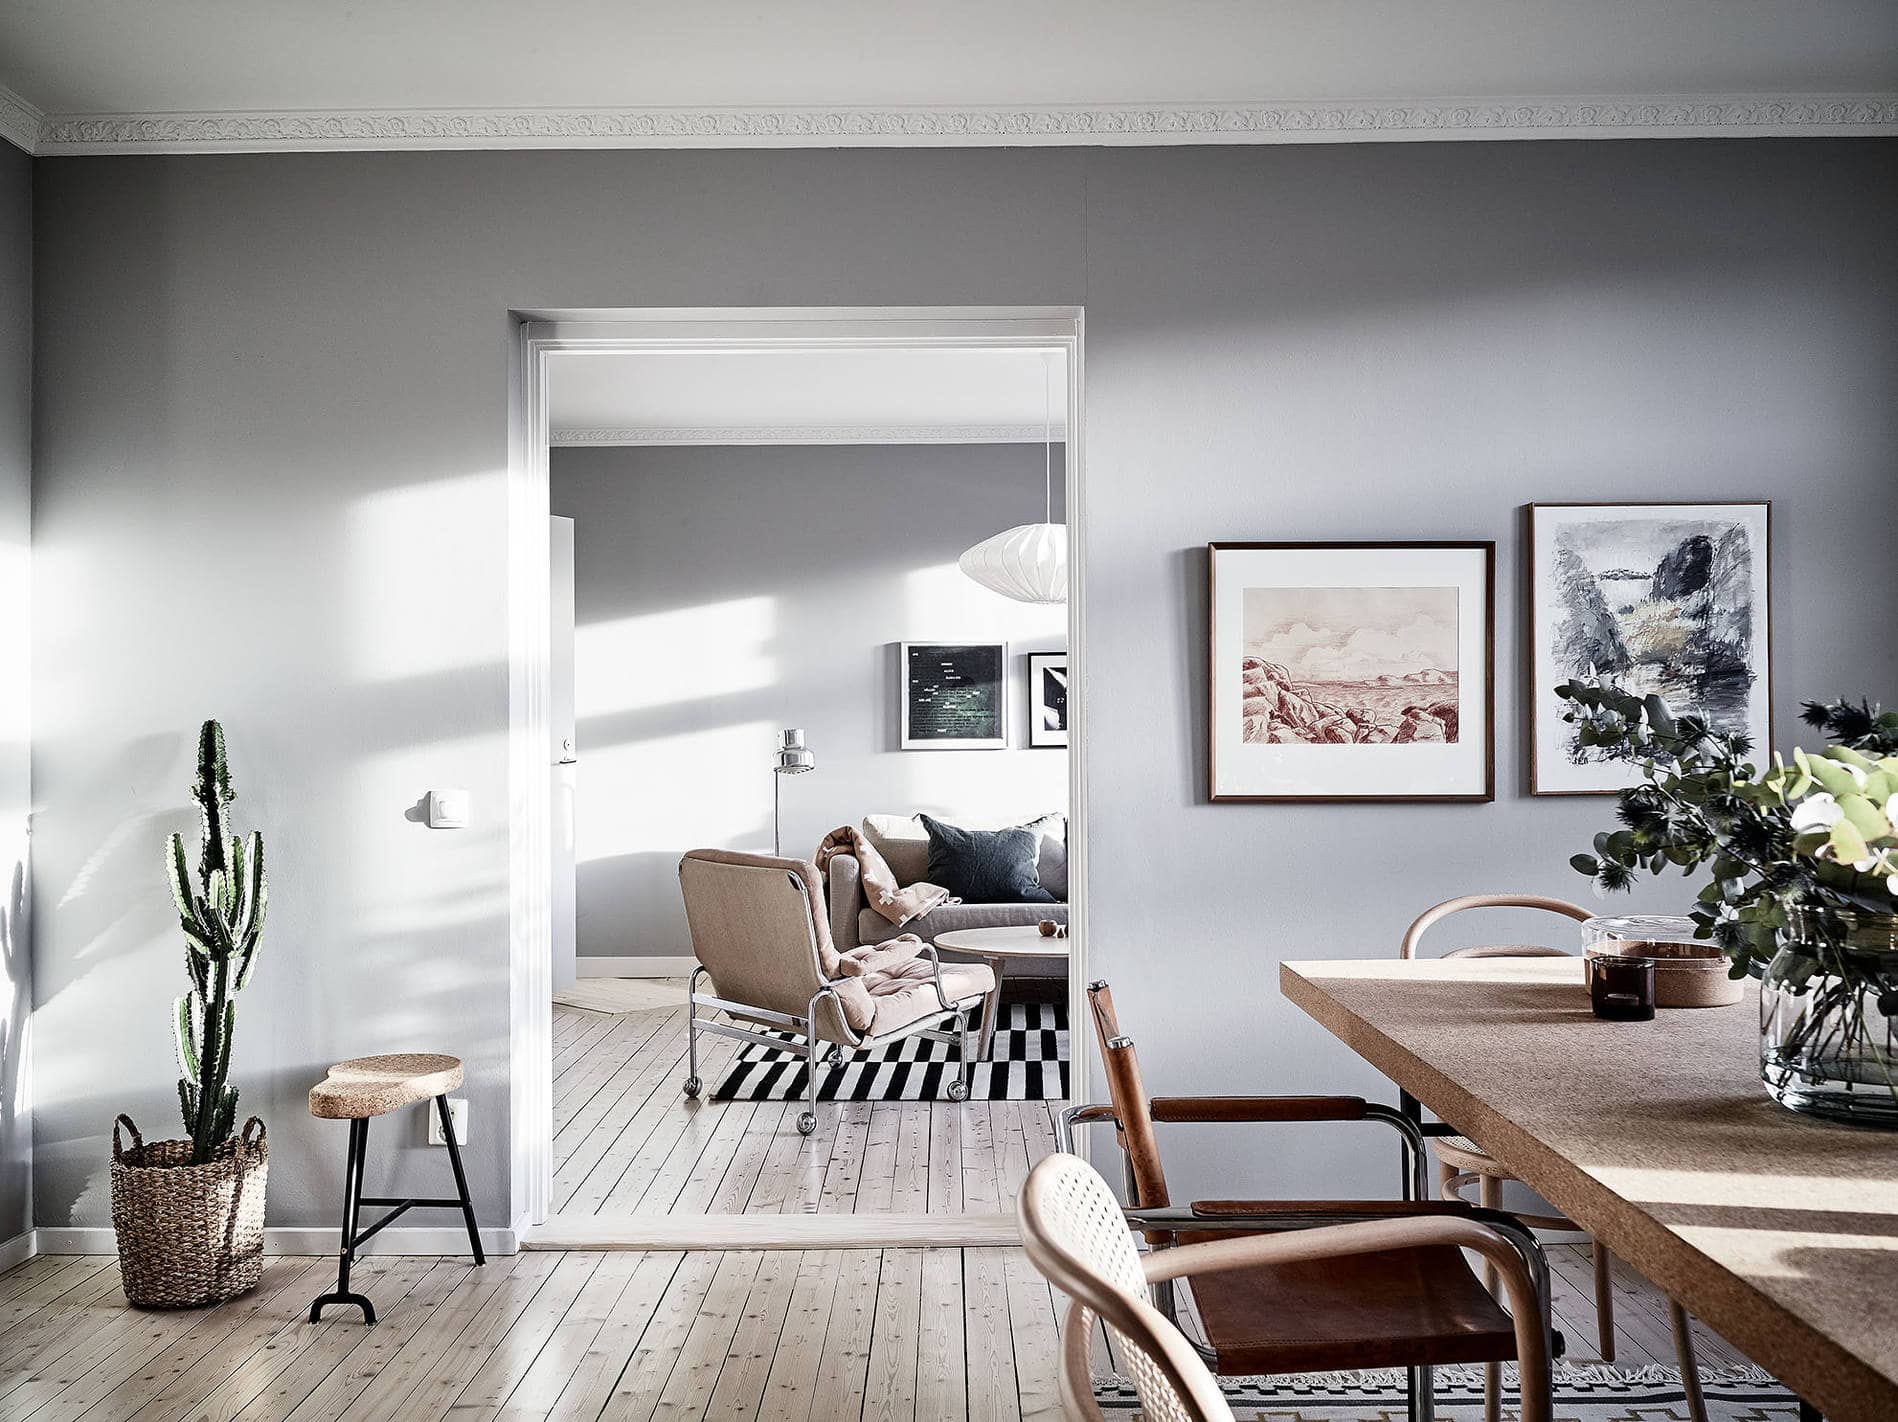 Home in grey and brown - via Coco Lapine Design